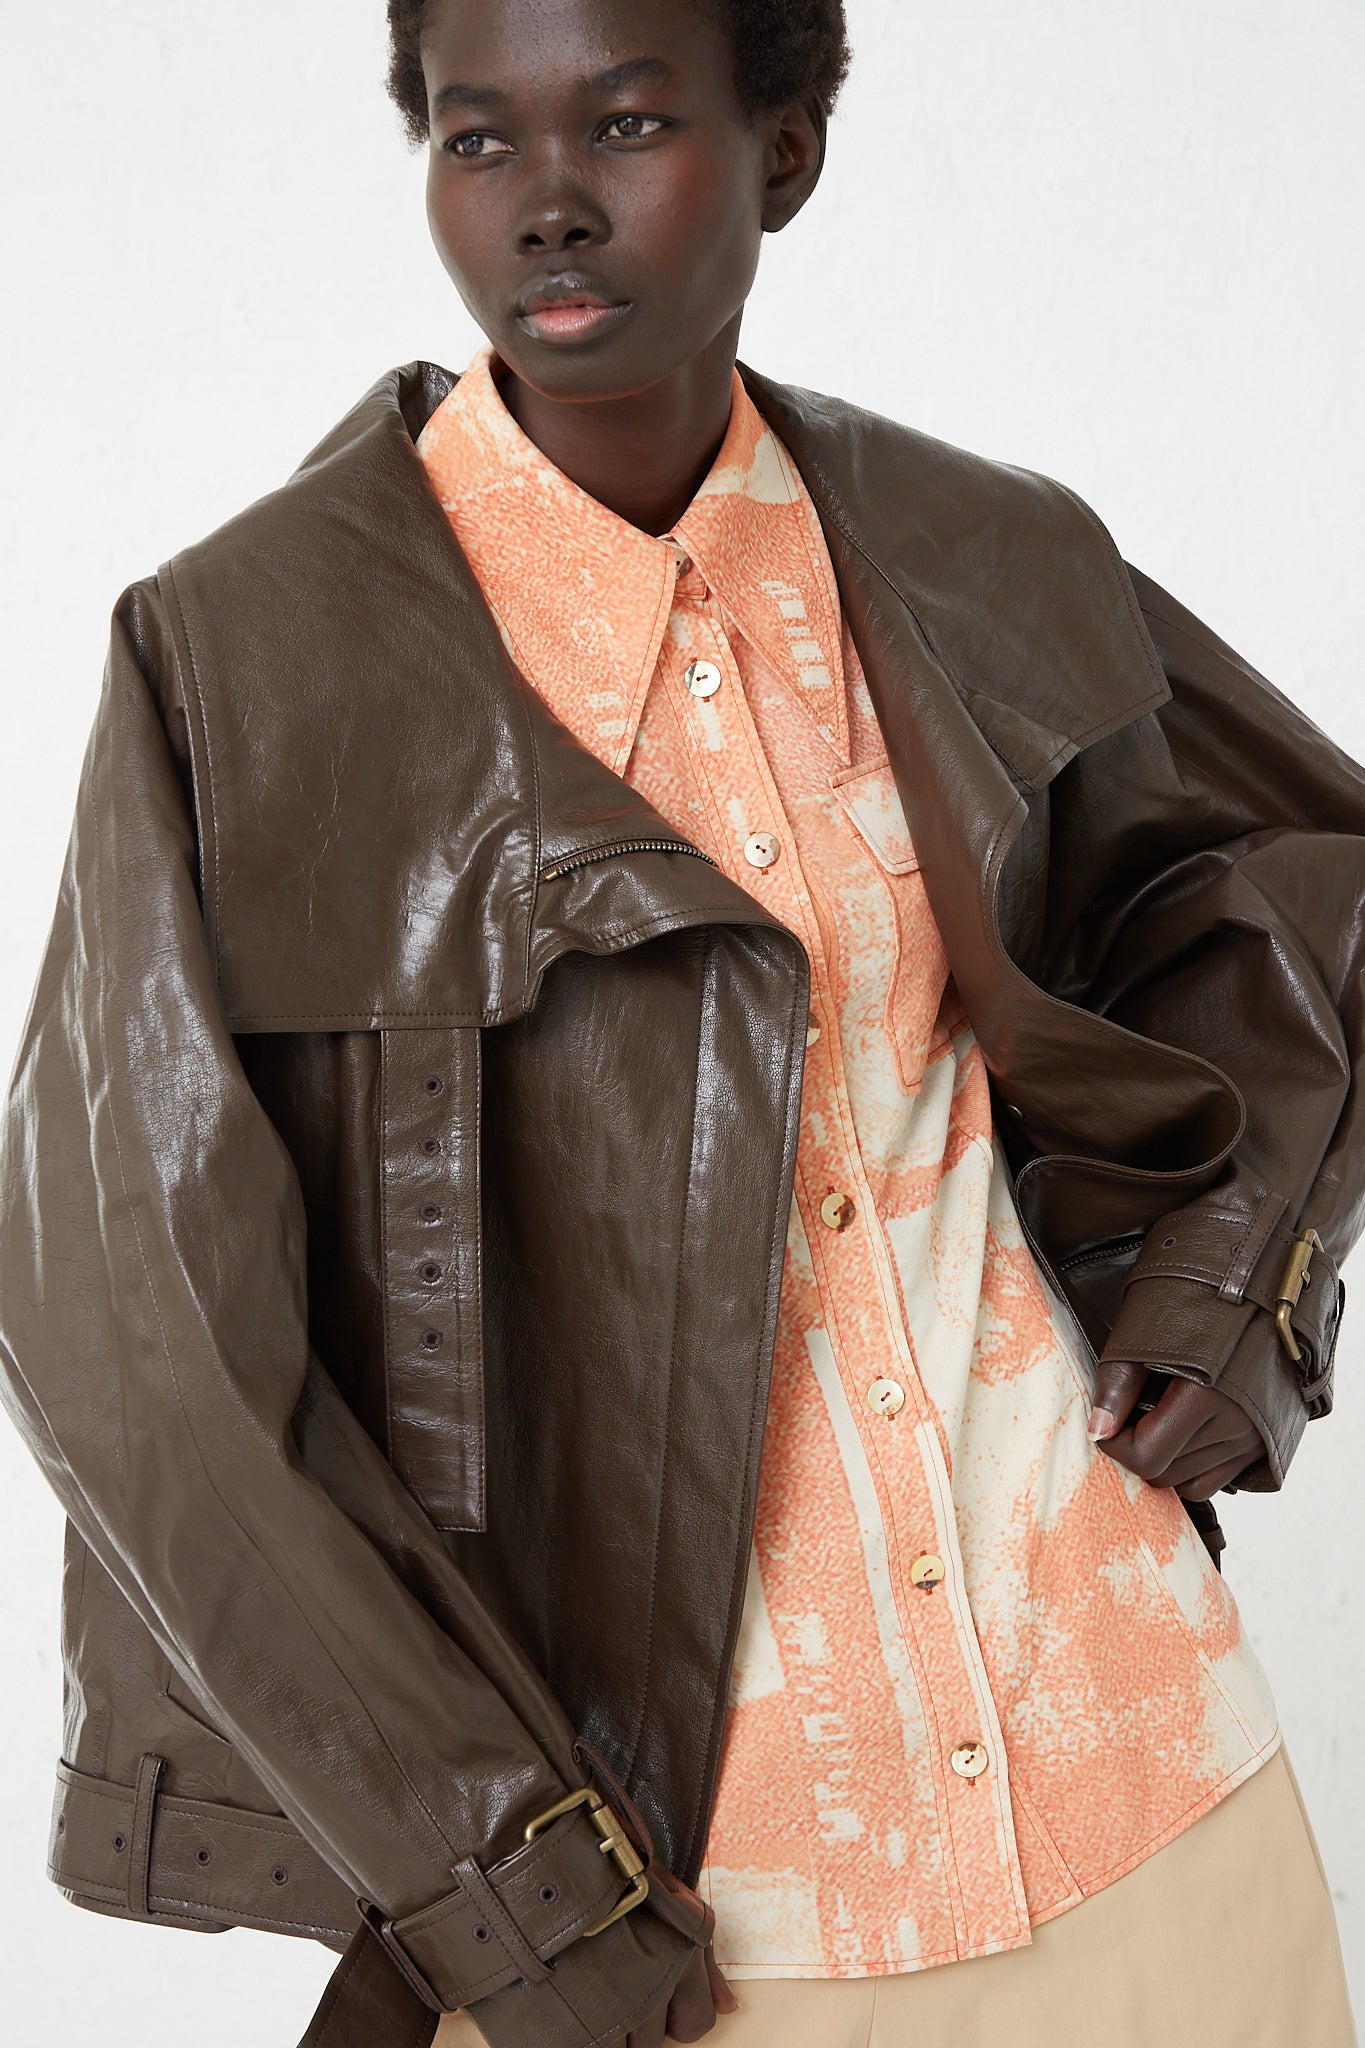 A model wearing a Rejina Pyo Faux Leather Juno Jacket in Dark Brown and orange shirt.